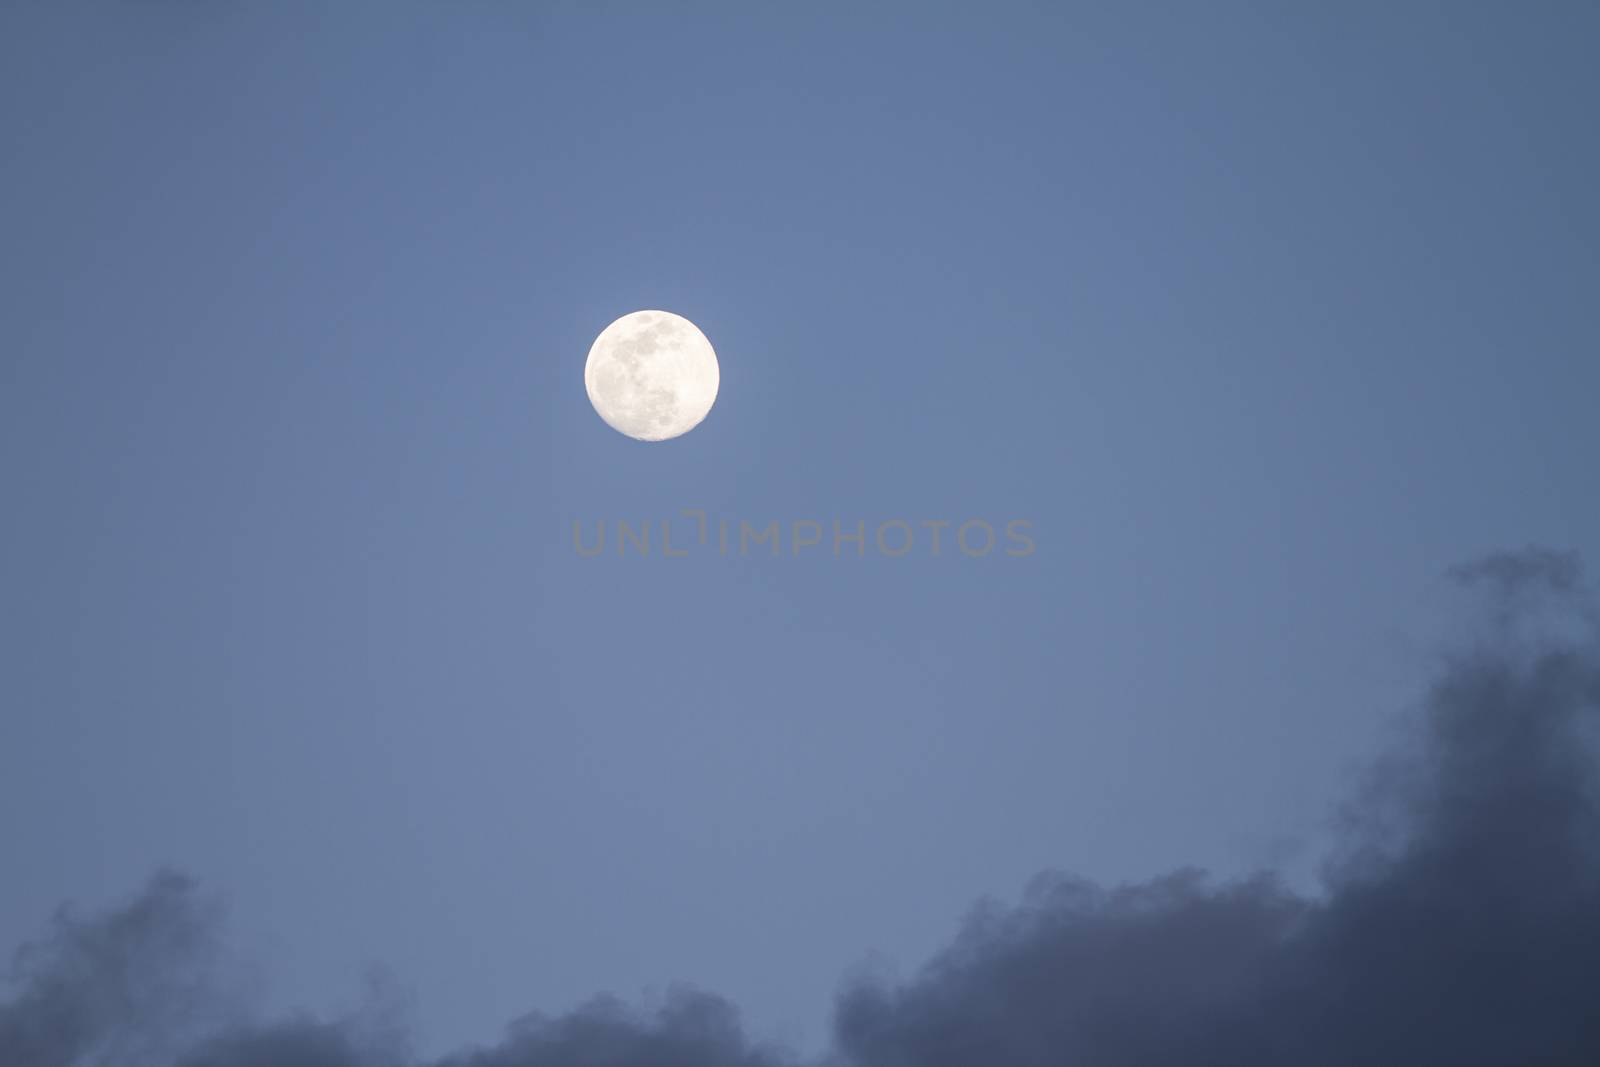 Full moon just risen in the dark blue sky with some gray clouds by robbyfontanesi